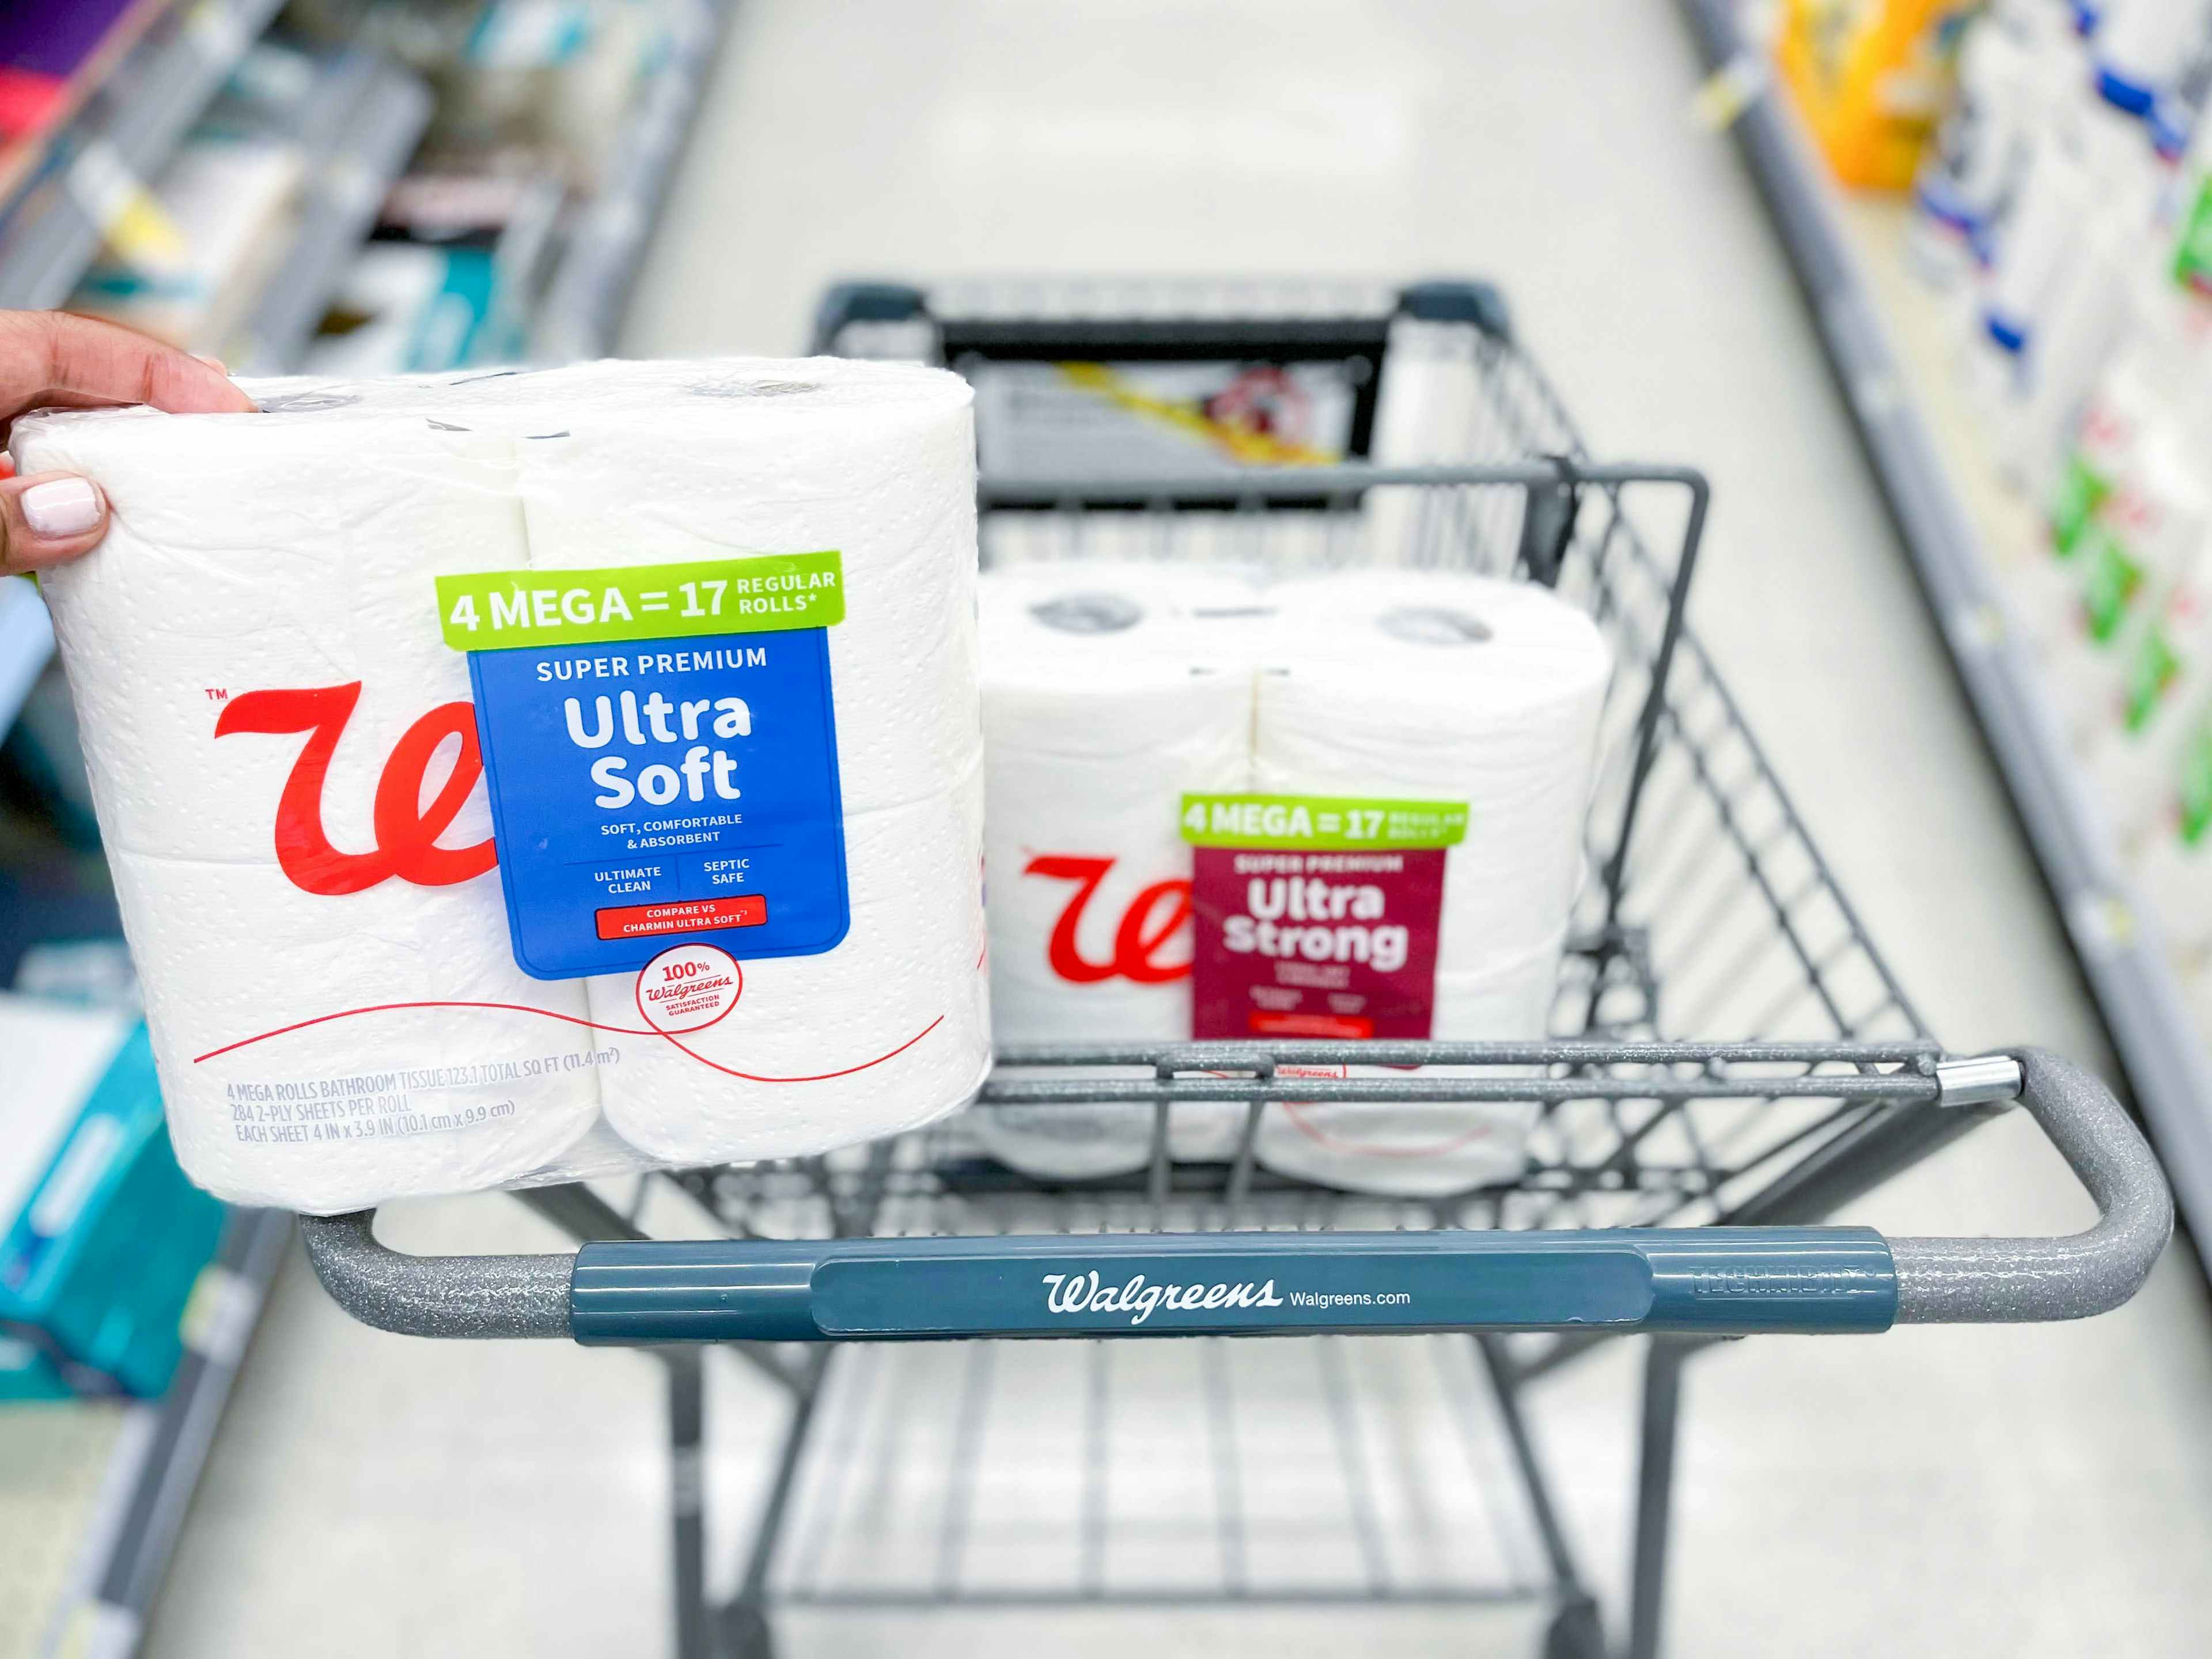 shopping cart with two packs of Walgreens toilet paper